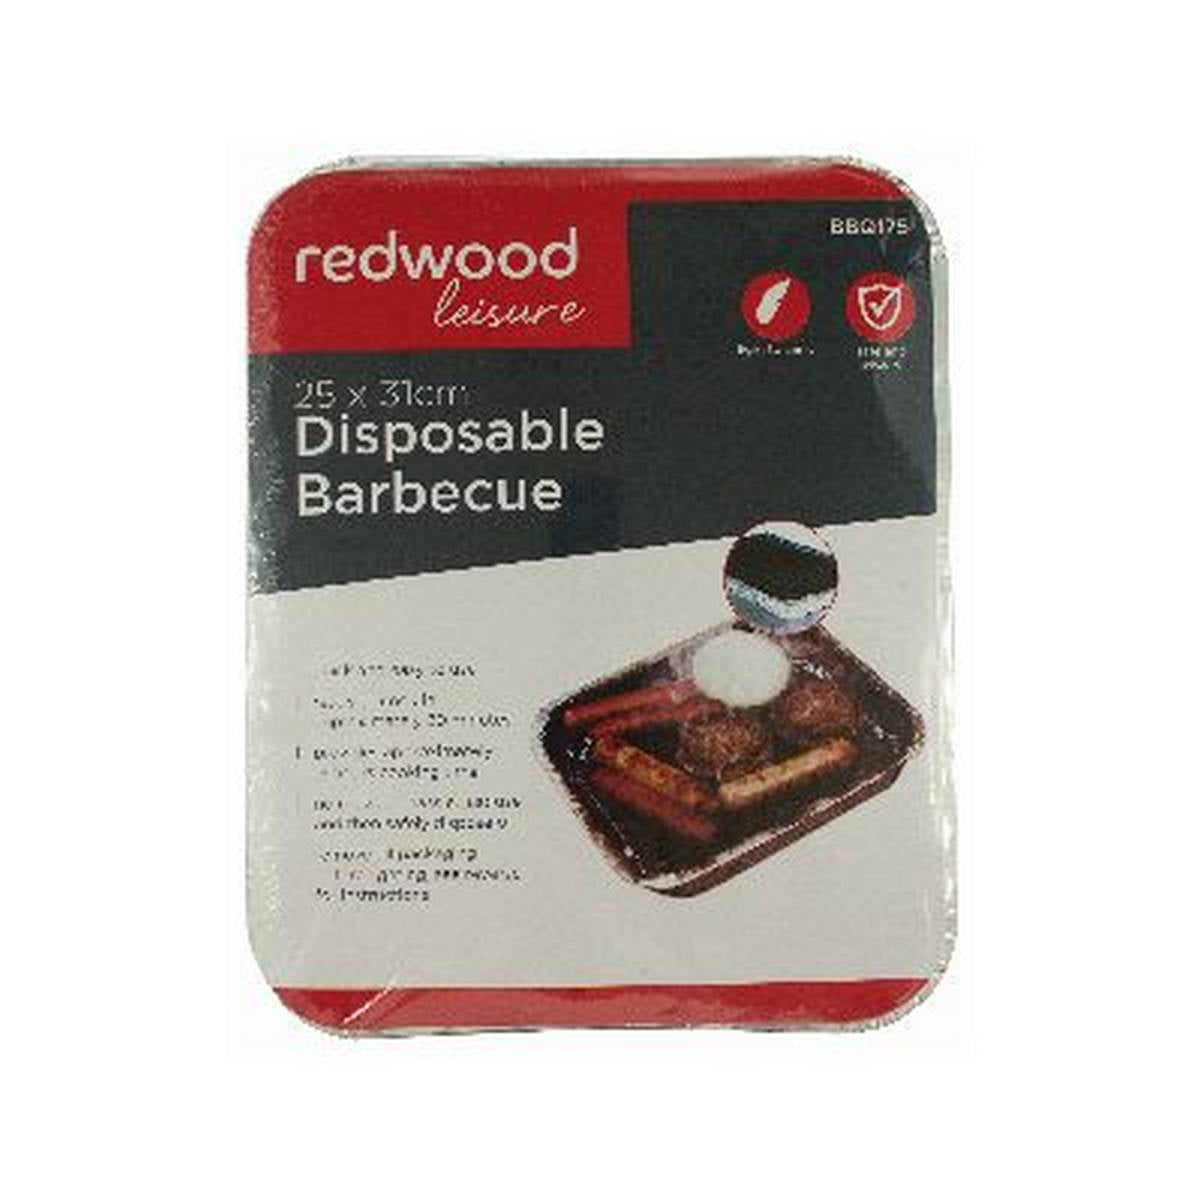 REDWOOD DISPOSABLE BARBECUE - 25 X 31CM BB-BBQ175